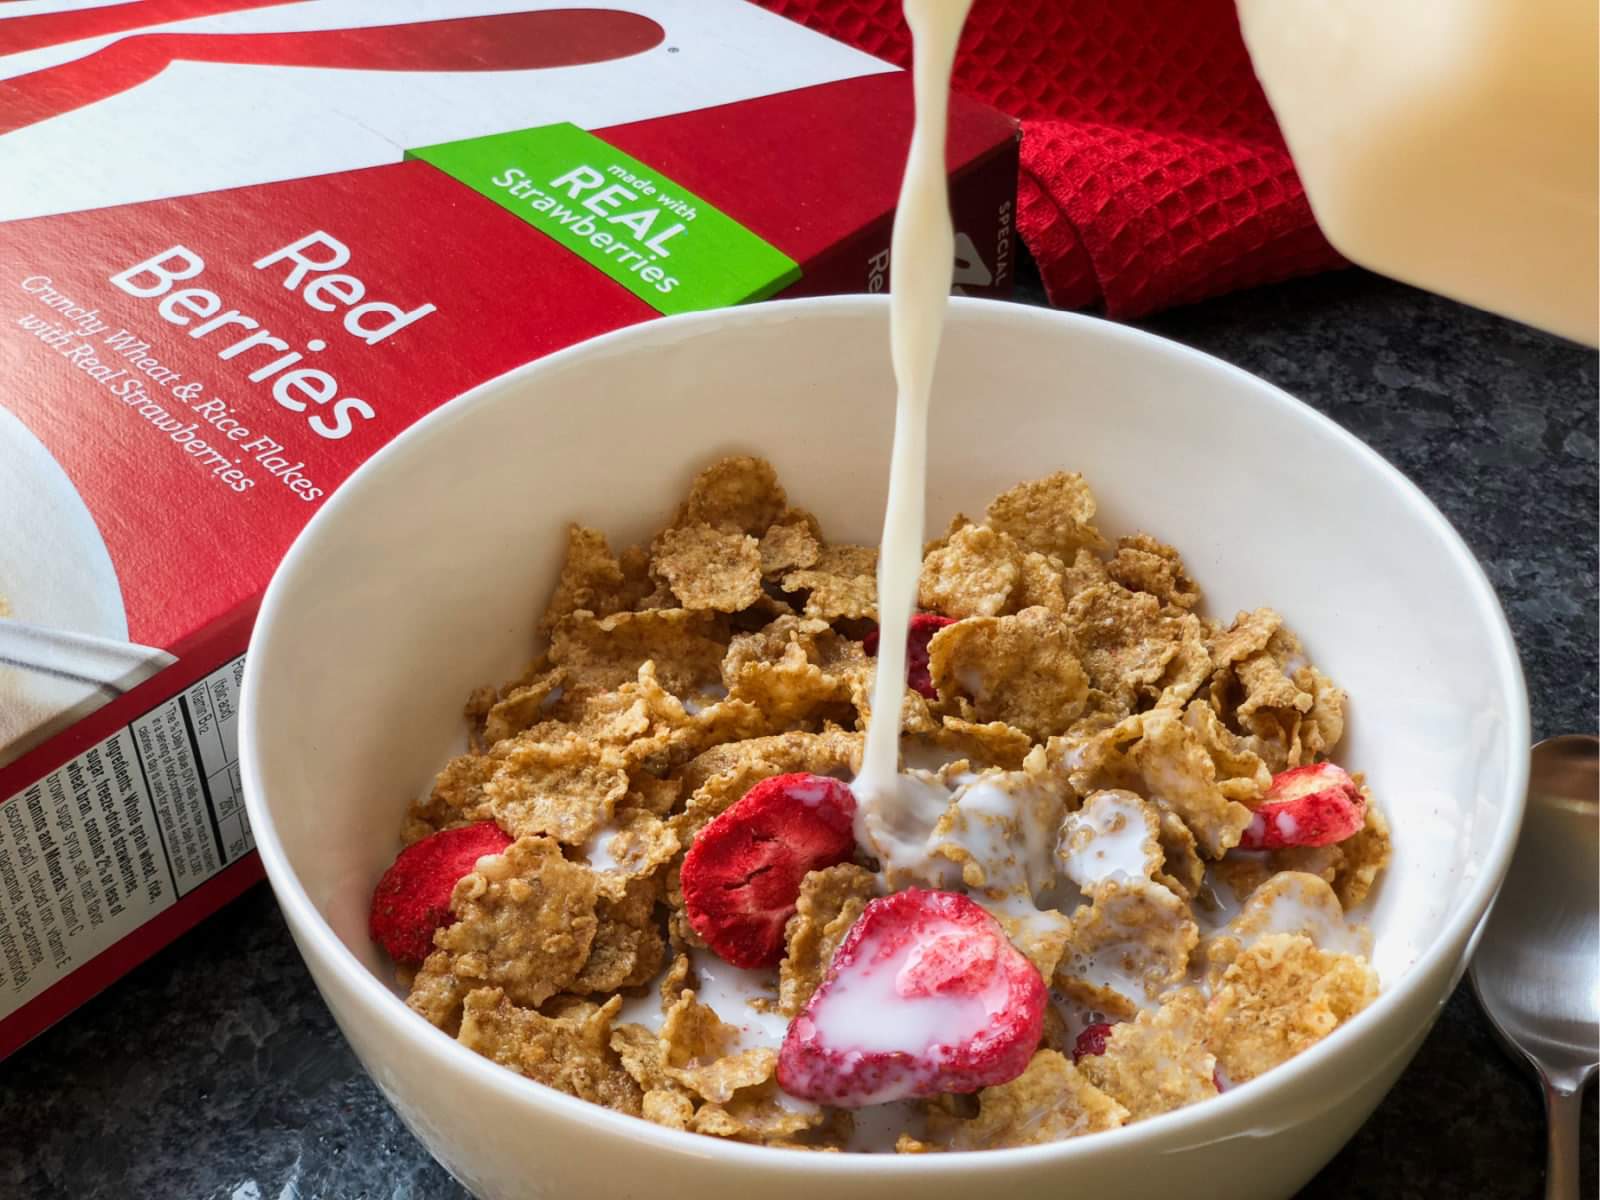 Get Boxes Of Kellogg’s Special K Cereal As Low As $1.73 Per Box At Publix